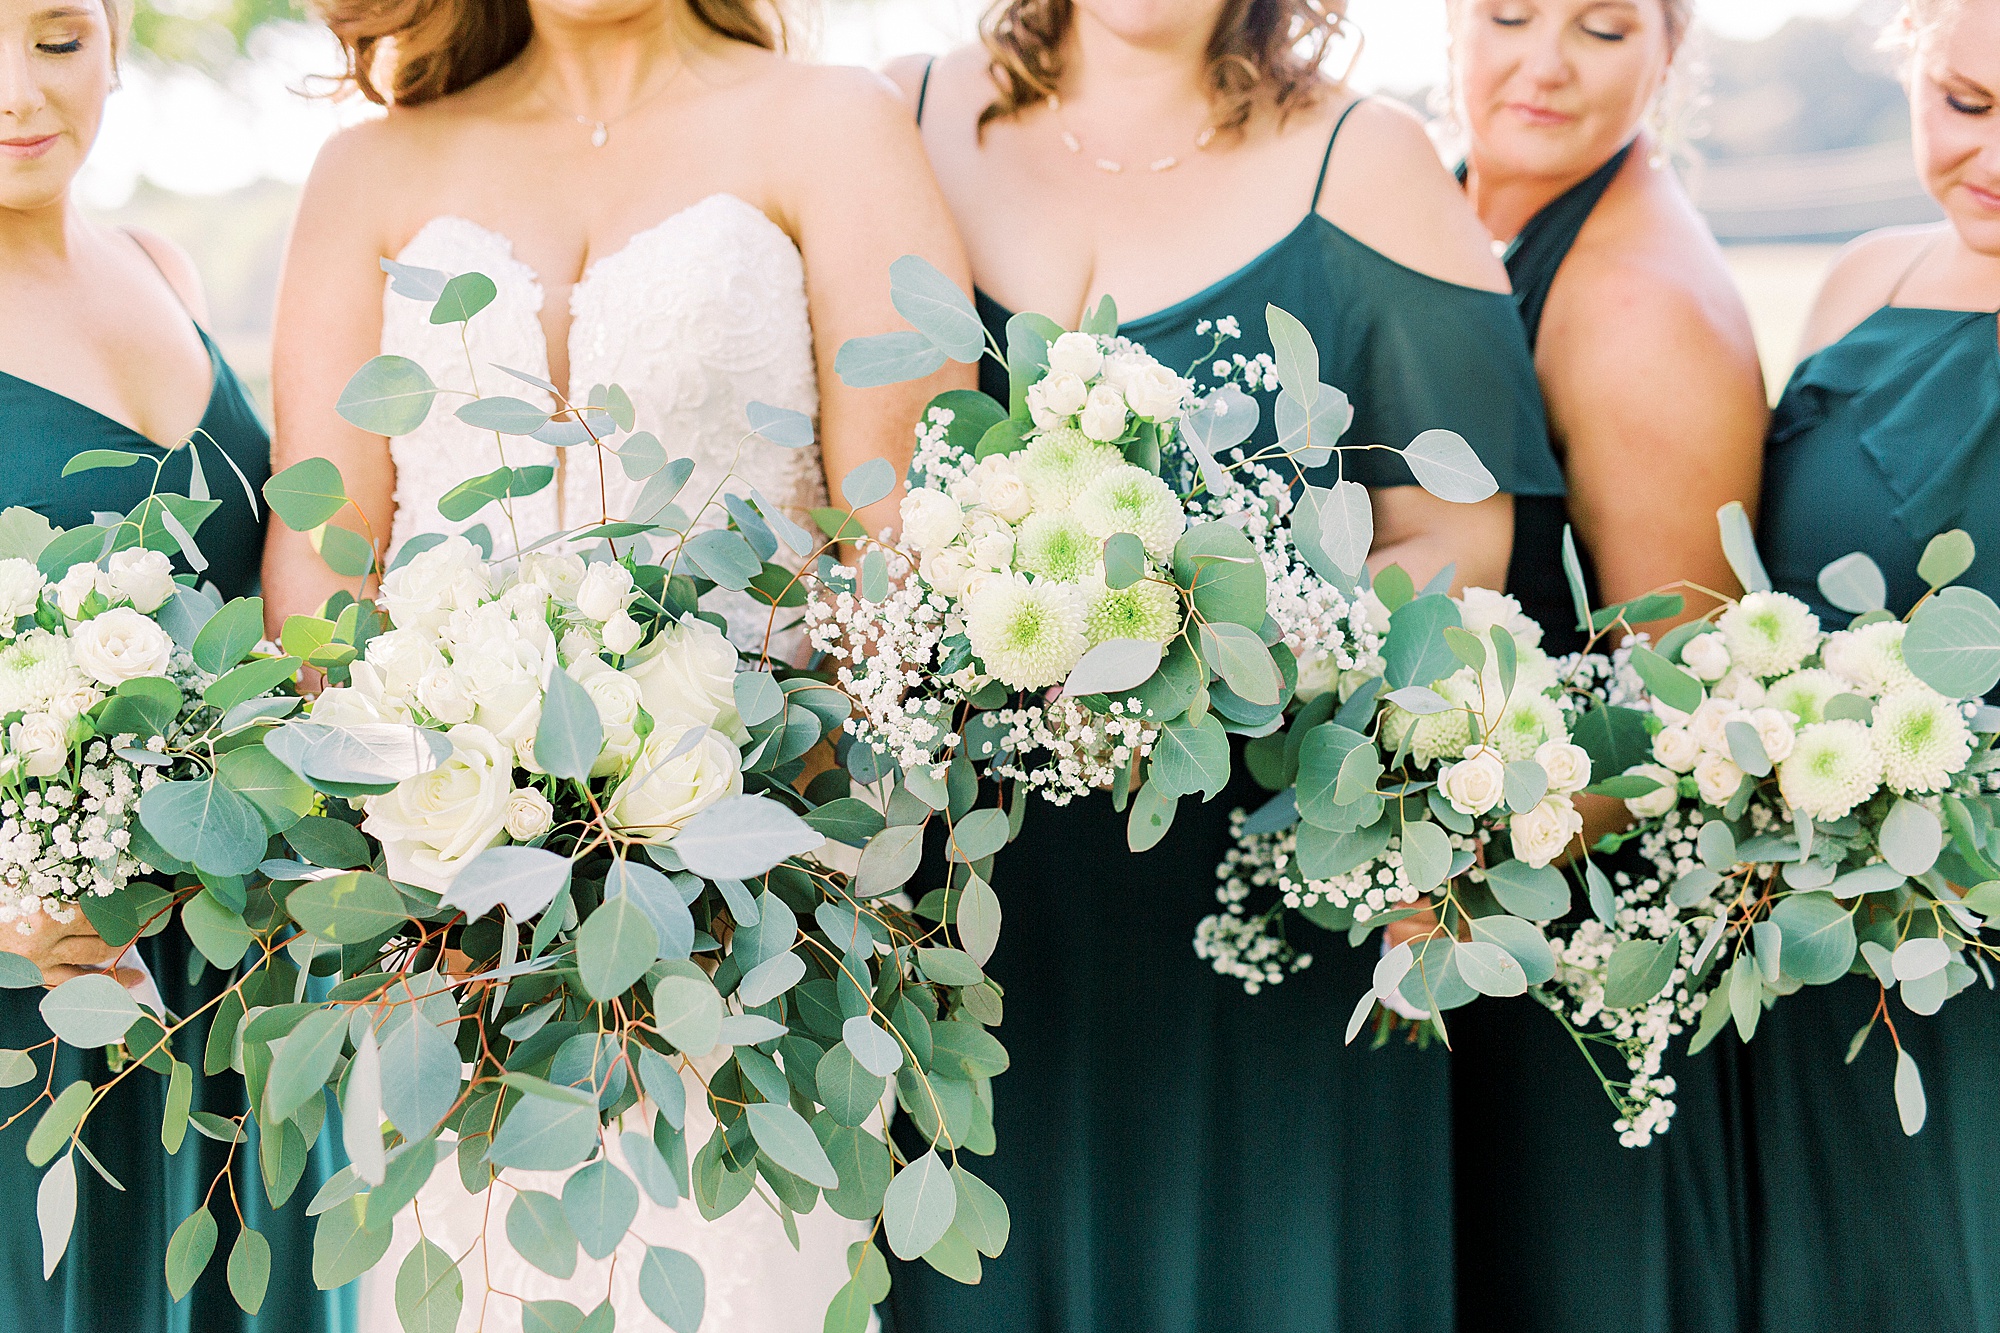 bride and bridesmaids hold white and green floral bouquets